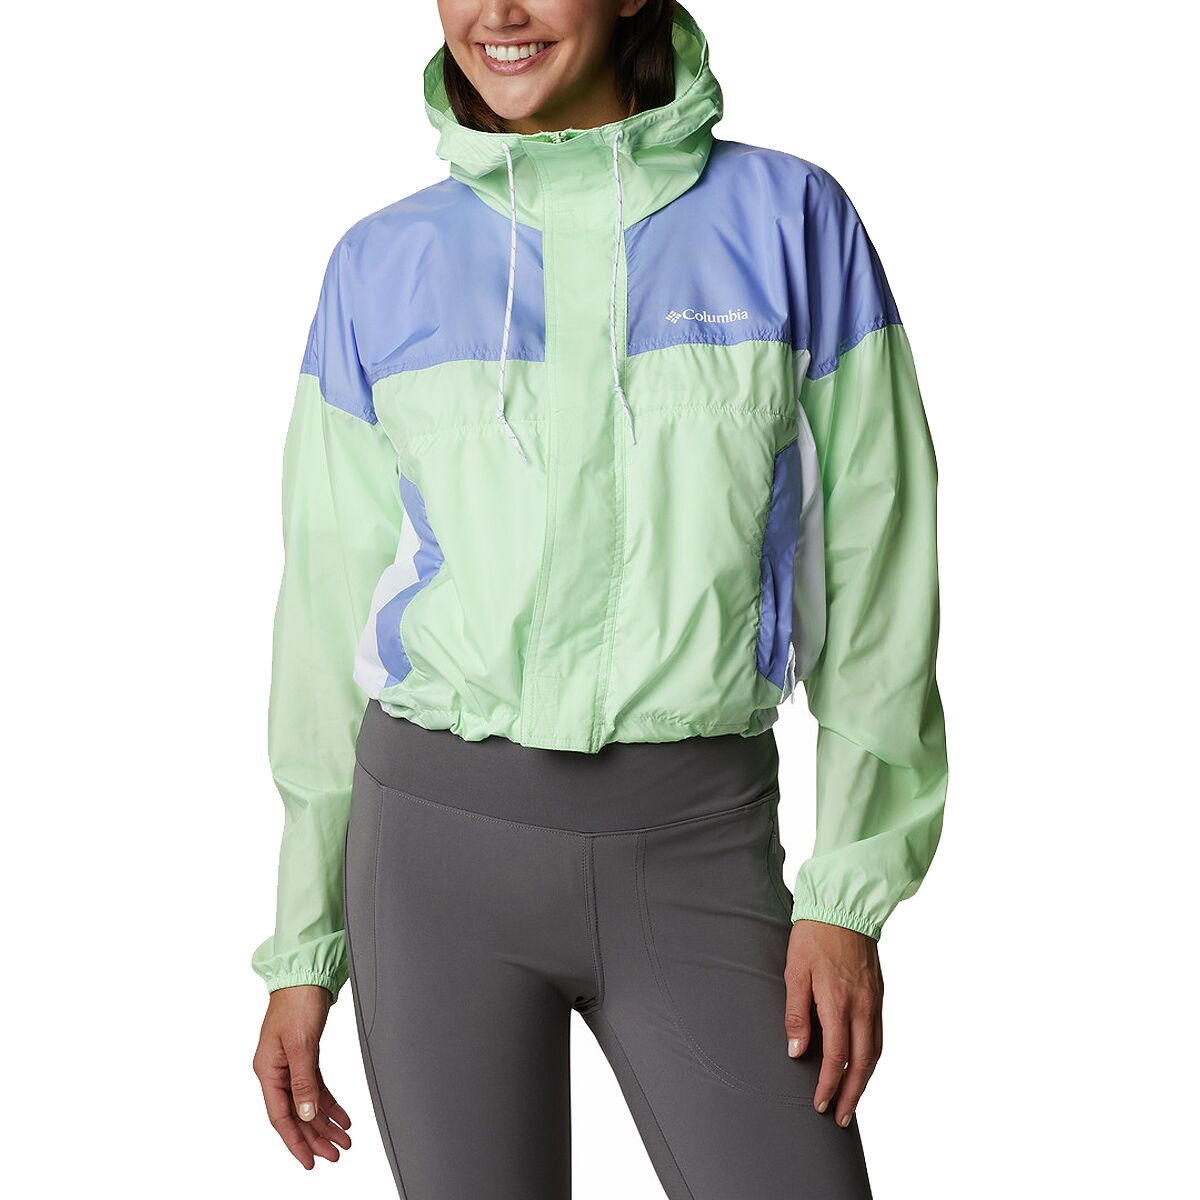 https://www.backcountry.com/images/items/1200/COL/COLZAYW/KEWESEWH.jpg